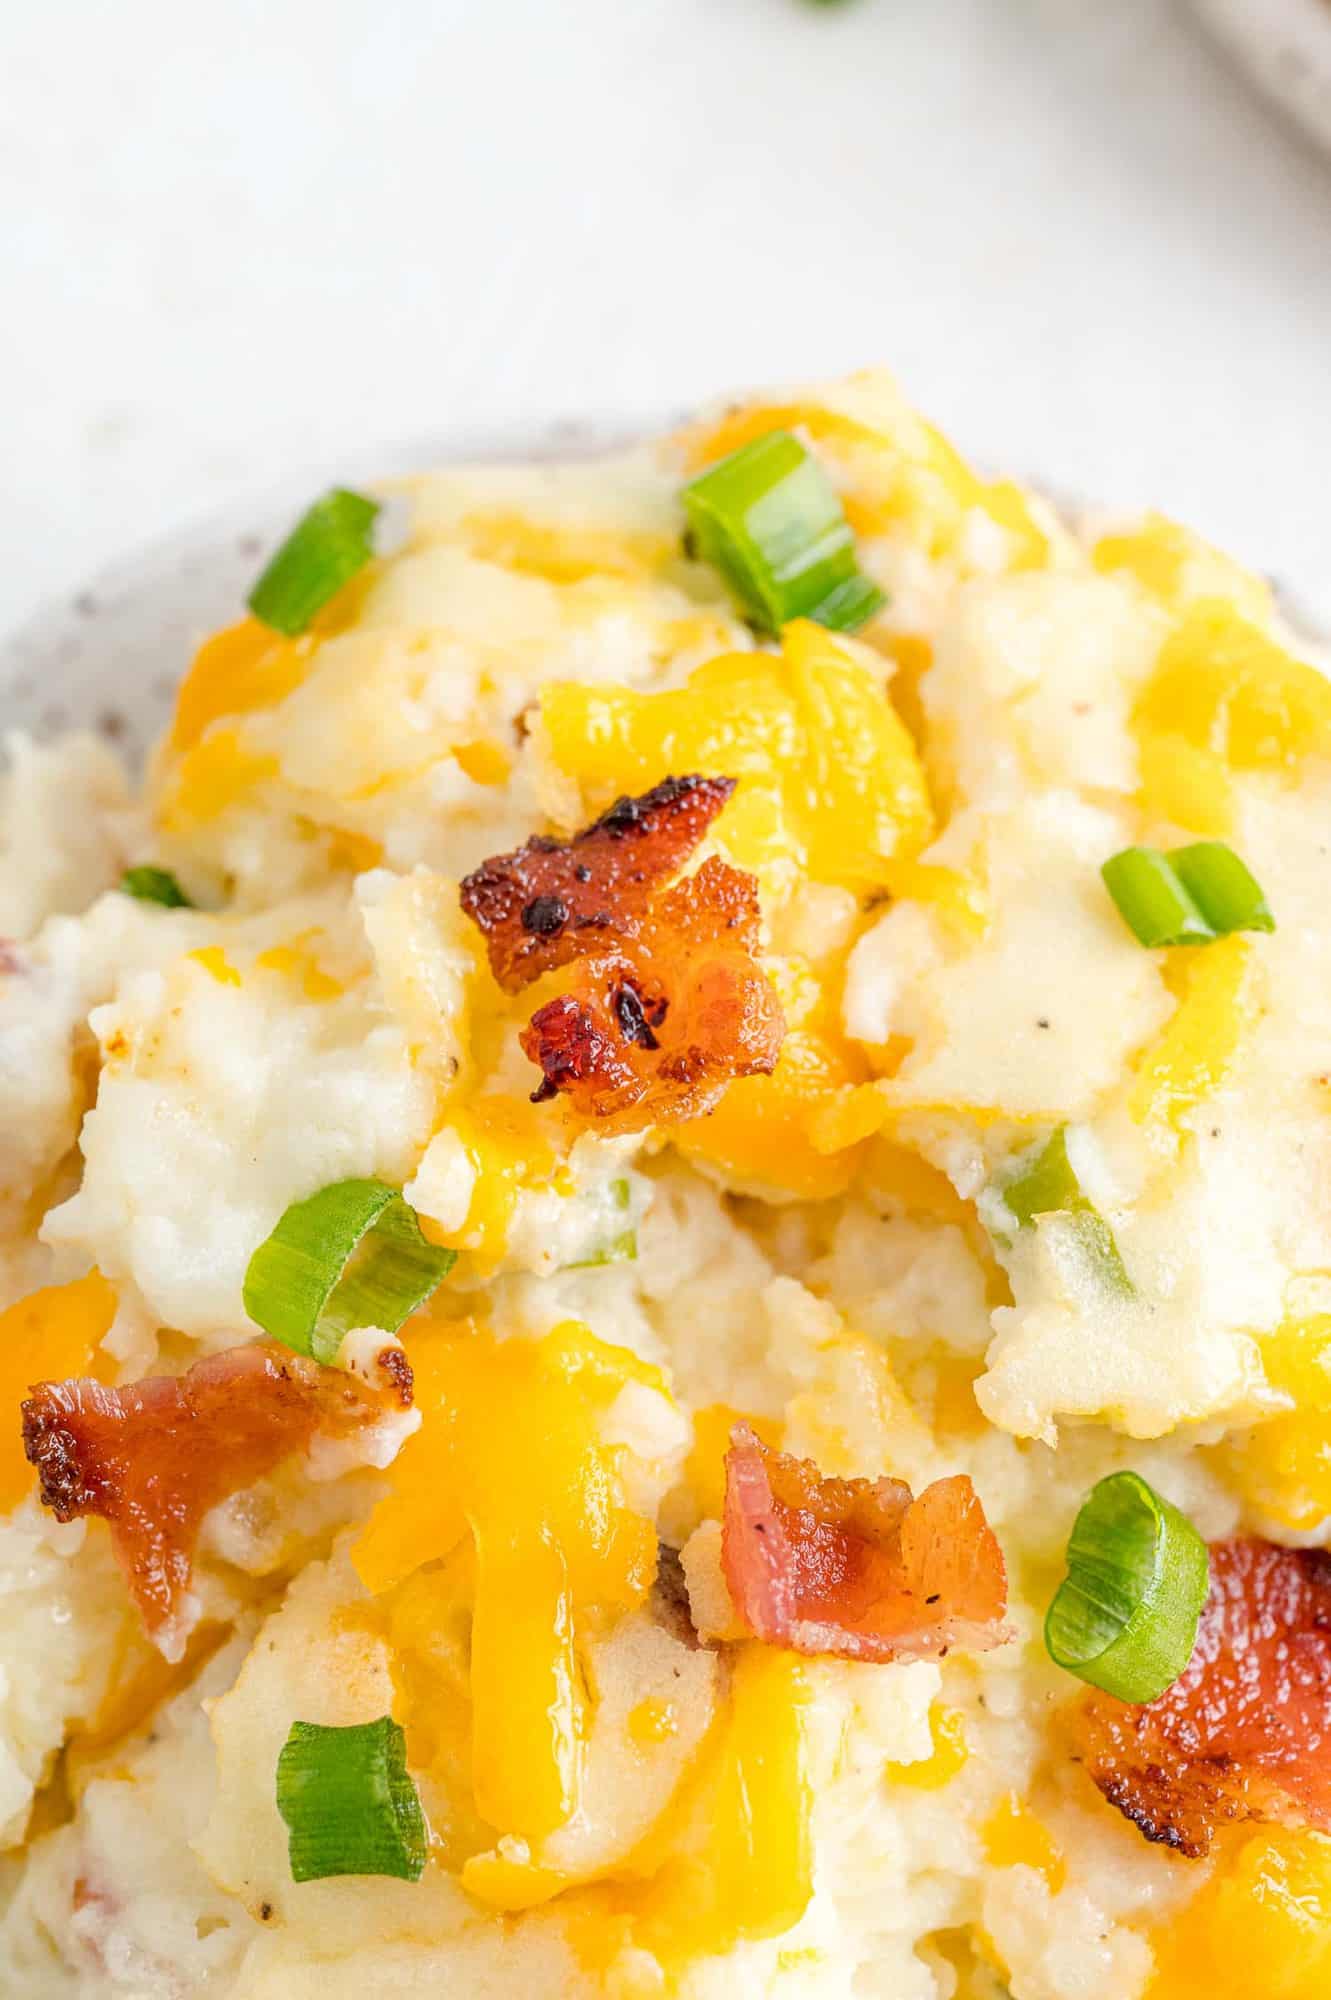 Mashed potatoes with cheese, bacon and green onion.